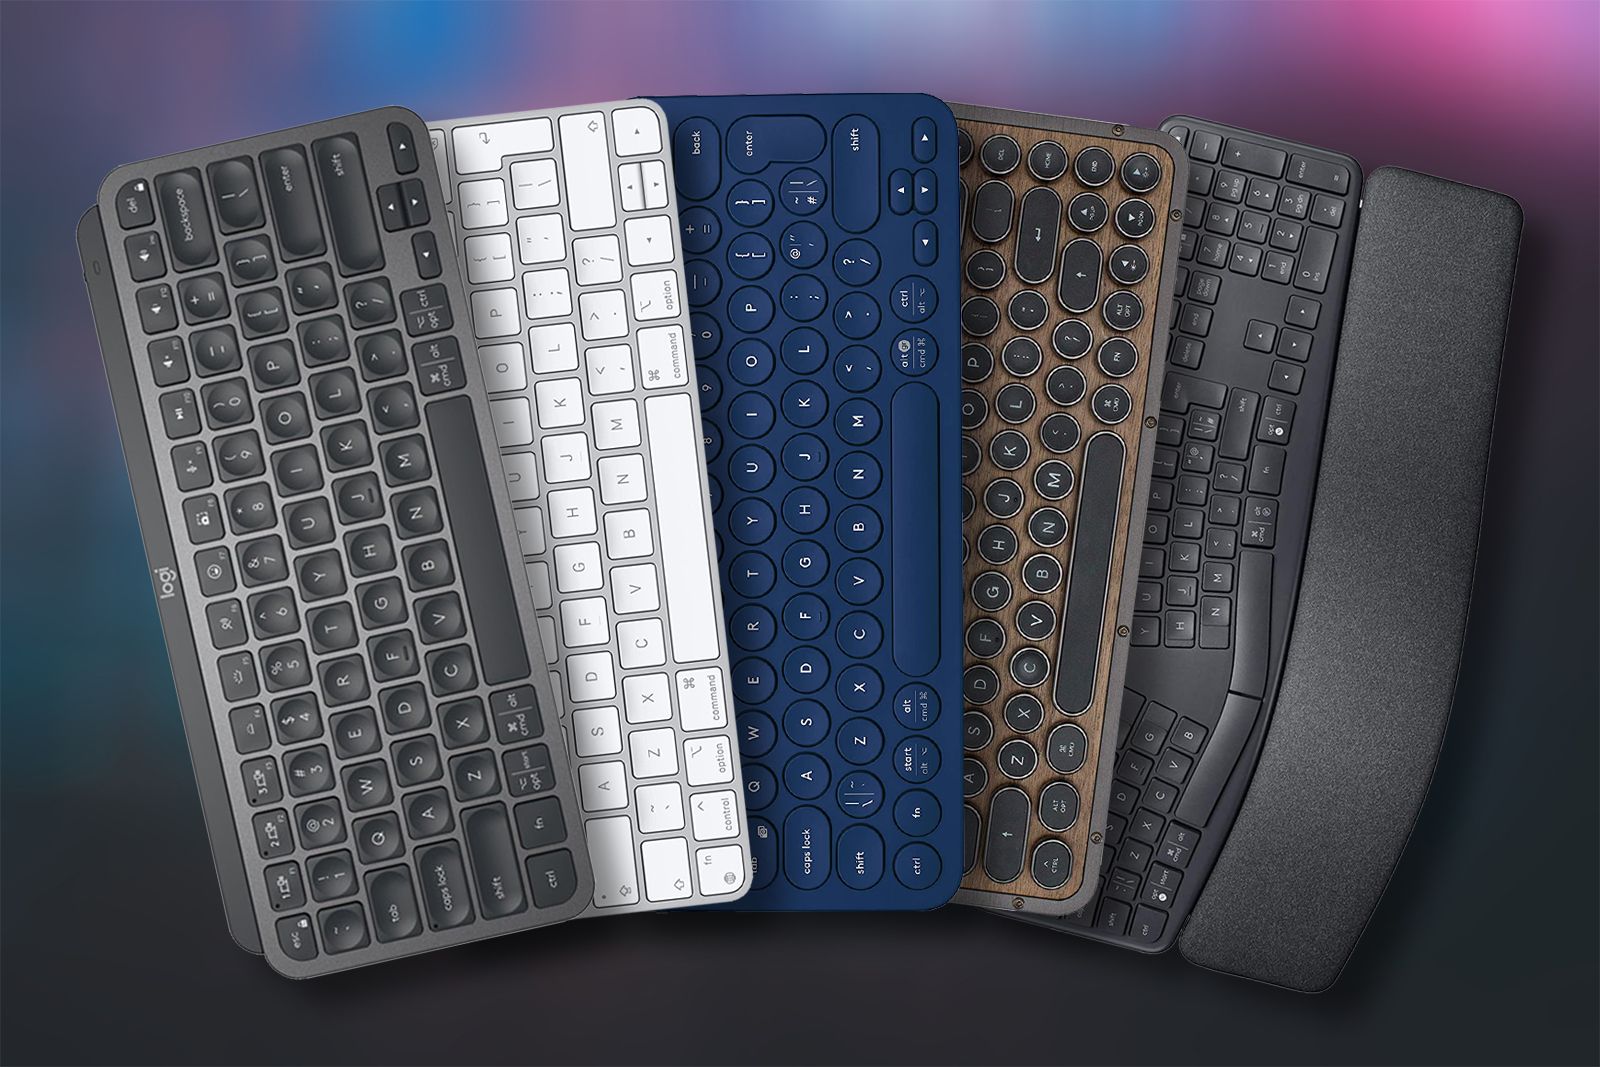 Best Mac keyboard: Our pick of the top keyboards for Apple users